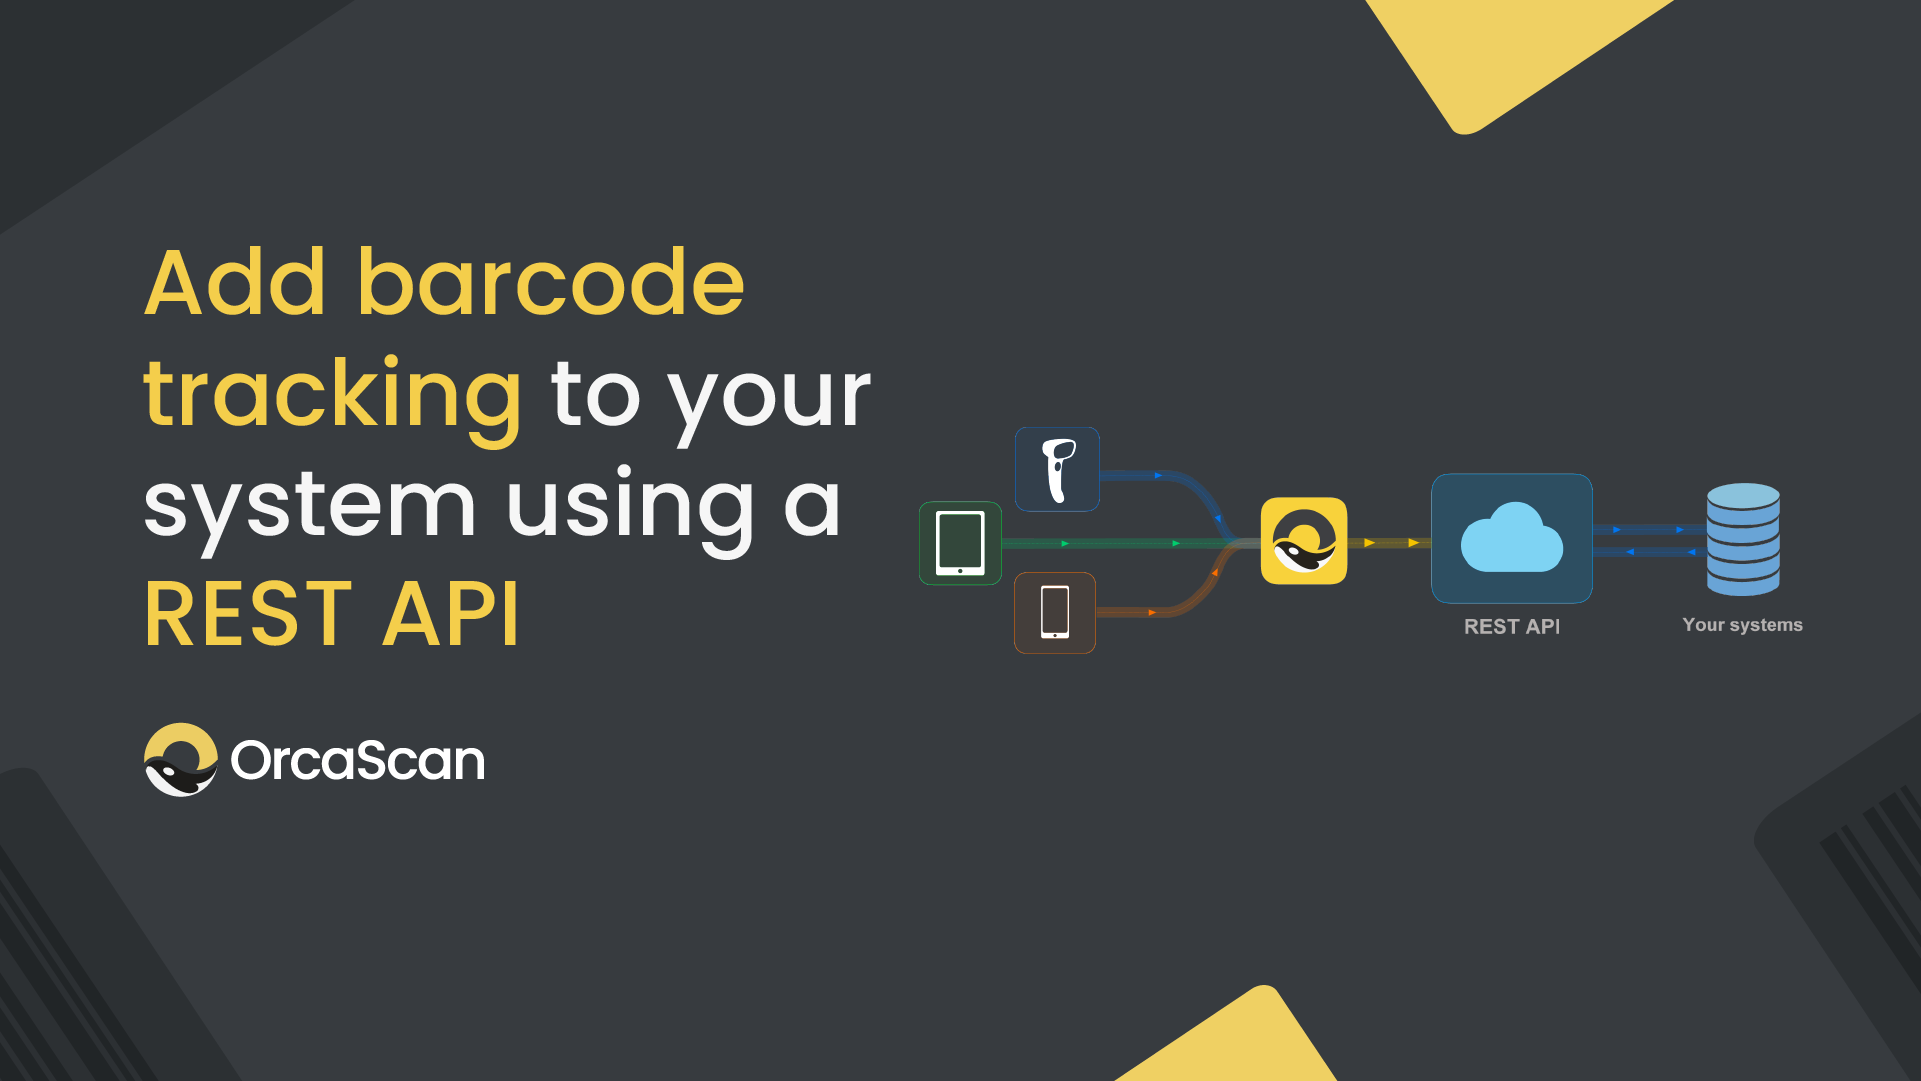 Add barcode tracking to your system using a REST API